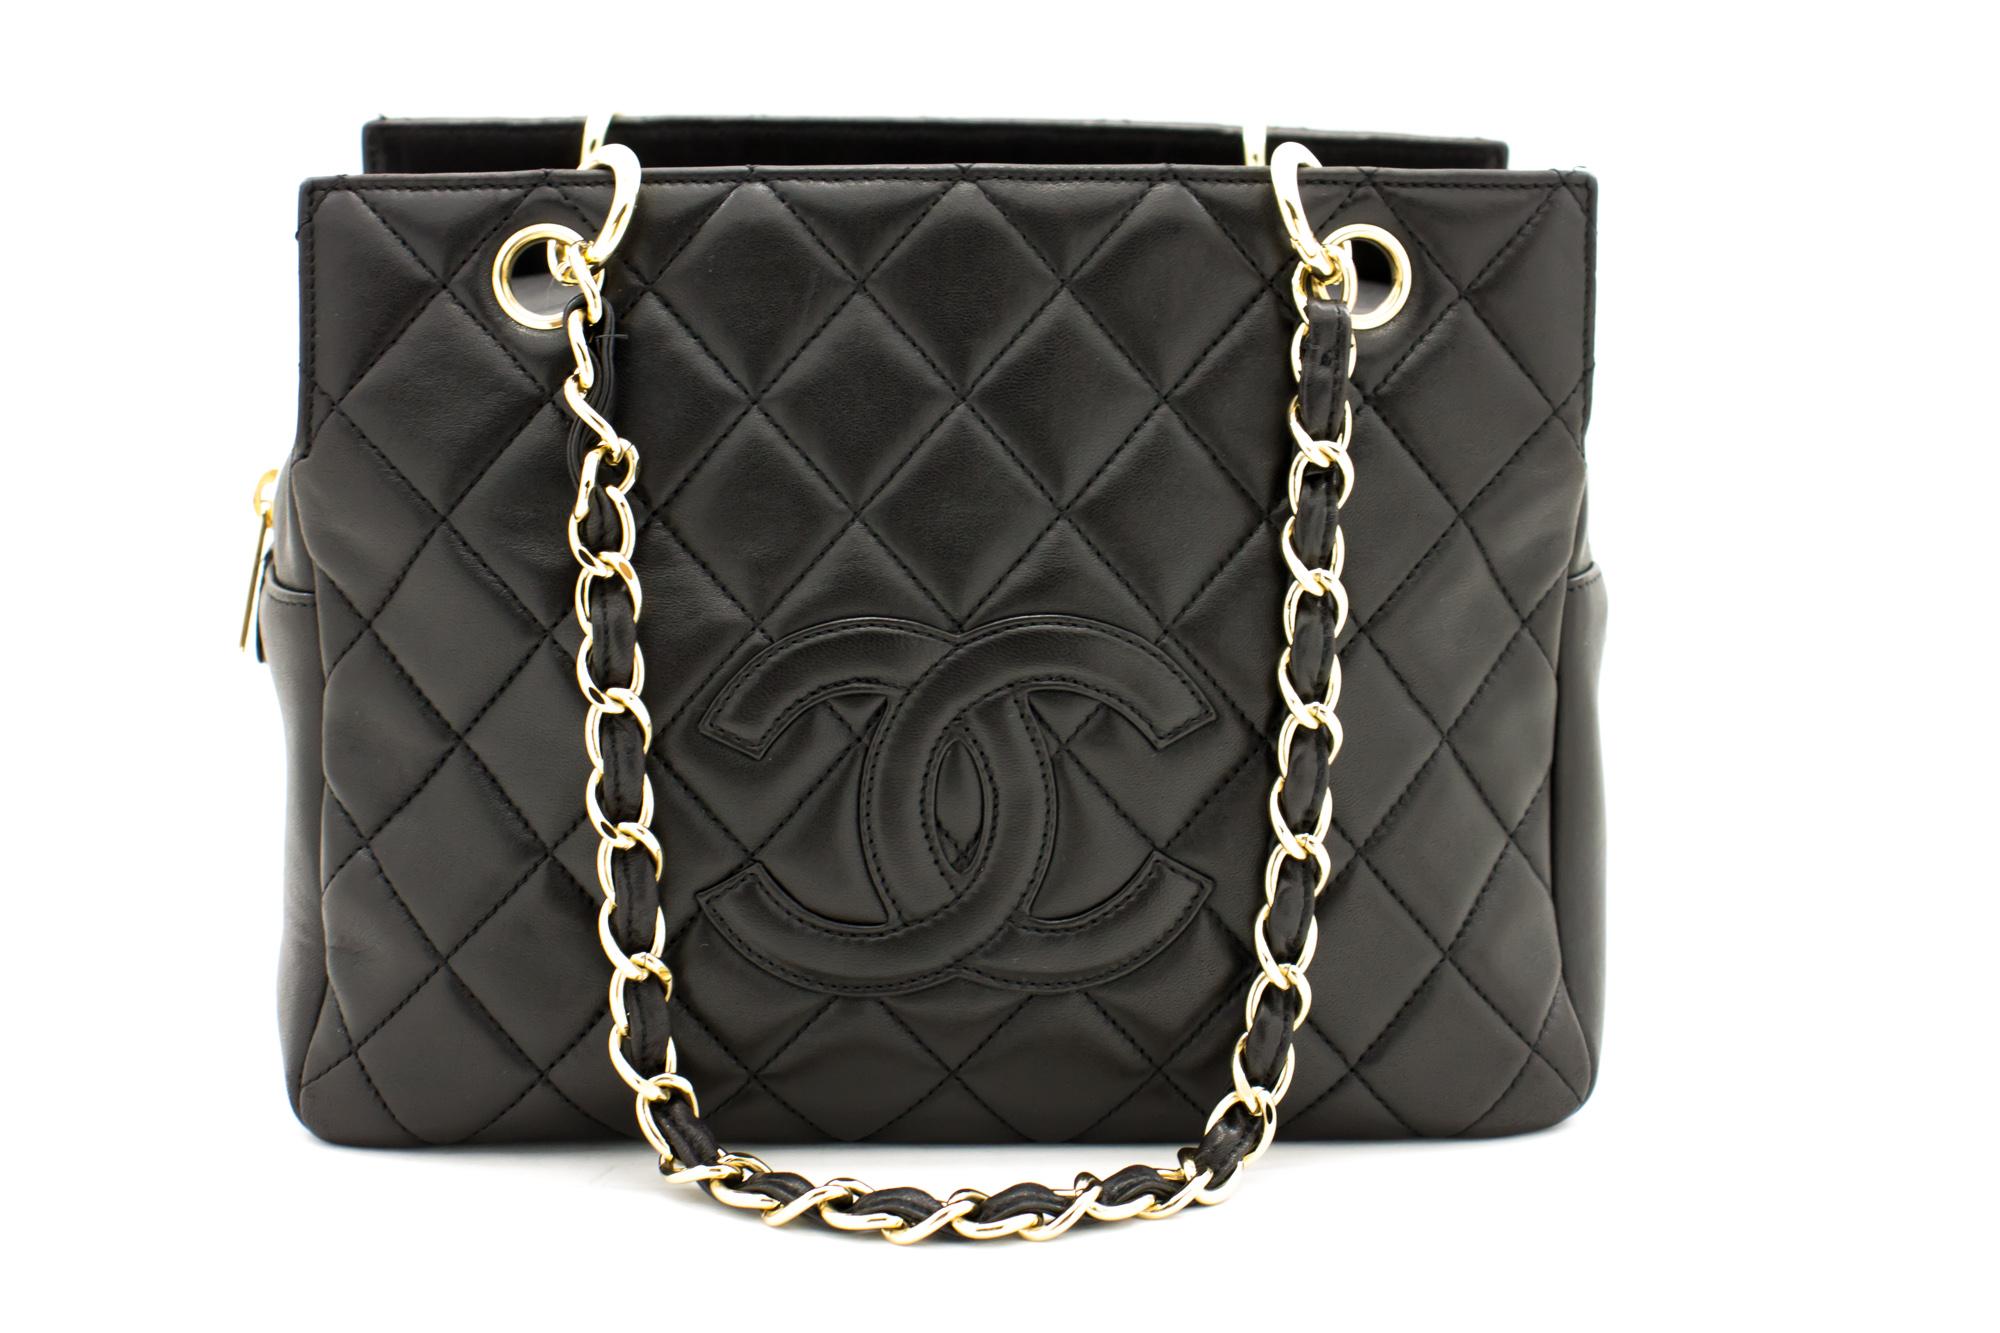 An authentic CHANEL made of black Lambskin Chain Shoulder Bag Shopping Tote Black Quilted. The color is Black. The outside material is Leather. The pattern is Solid. This item is Contemporary. The year of manufacture would be 2 0 0 2 .
Conditions &